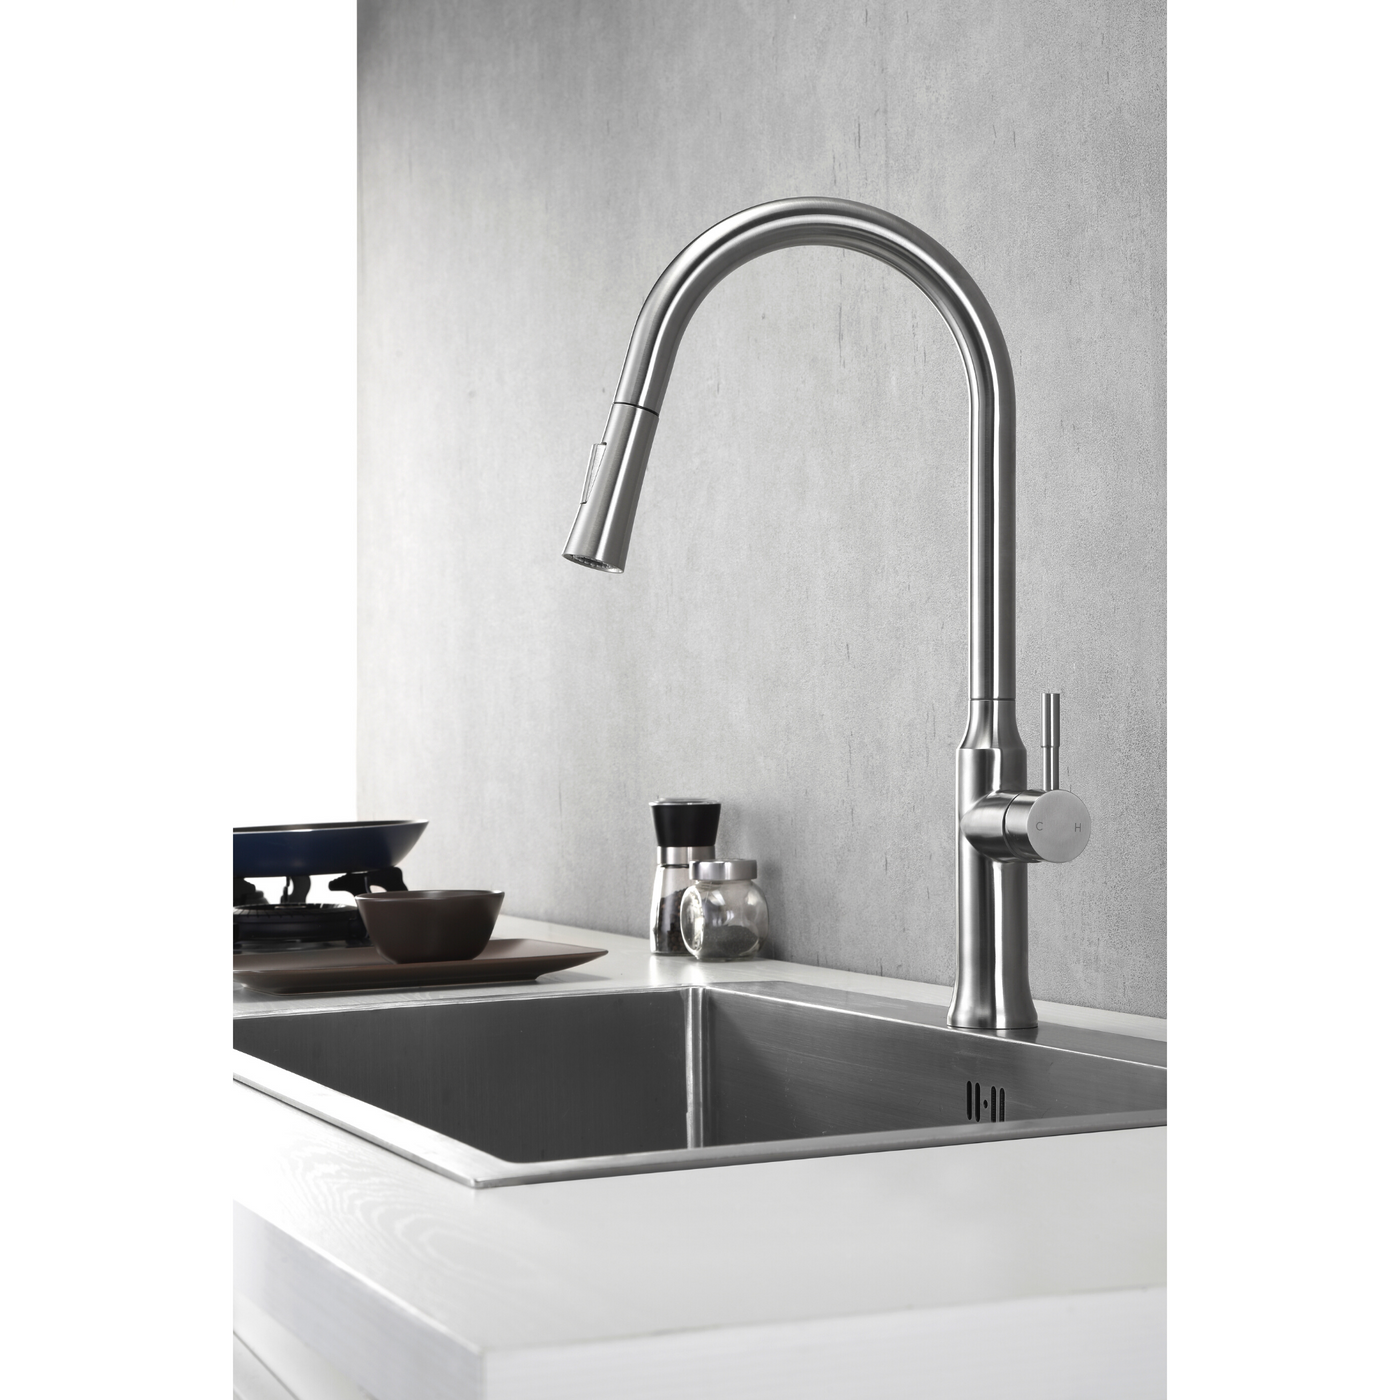 Contemporary Style Single-Handle Kitchen Sink Faucet with Pull-Down Sprayer